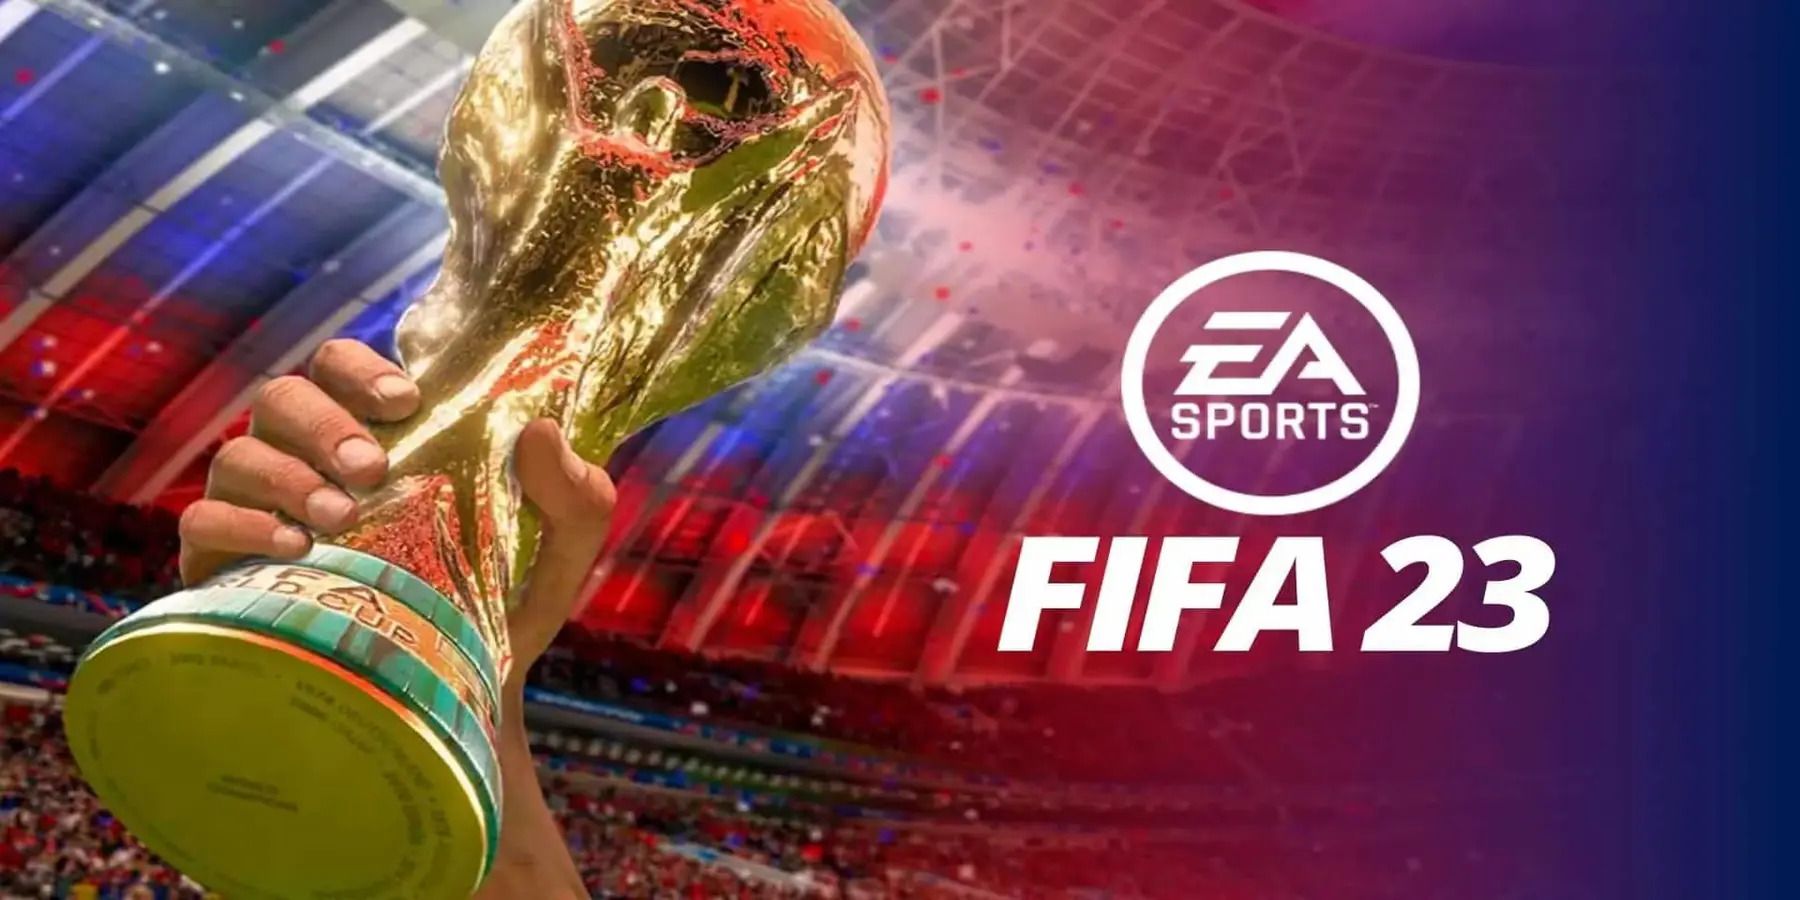 FIFA 23 brings gamers and sports fans together over Christmas